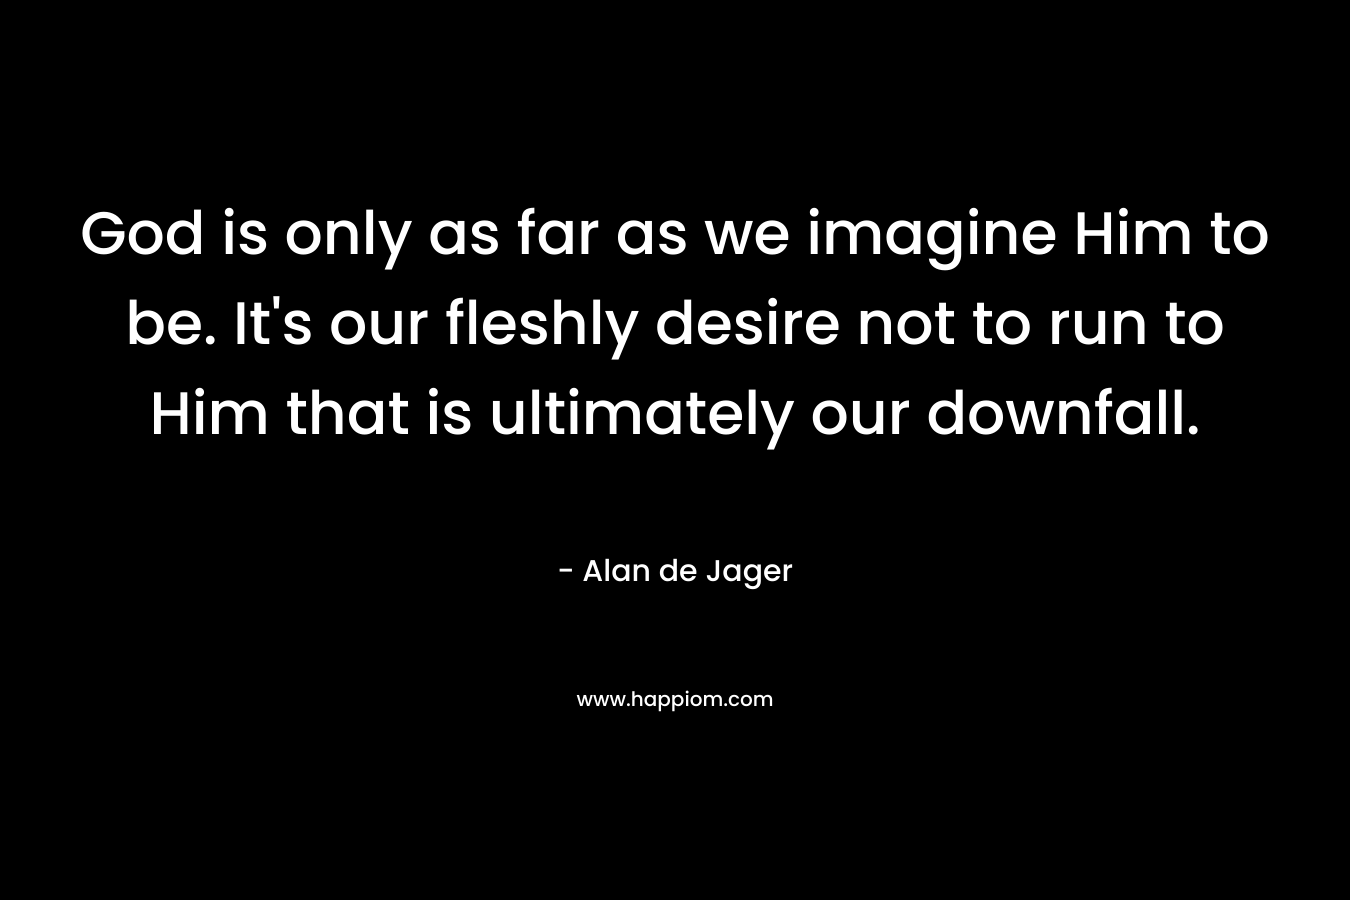 God is only as far as we imagine Him to be. It’s our fleshly desire not to run to Him that is ultimately our downfall. – Alan de Jager